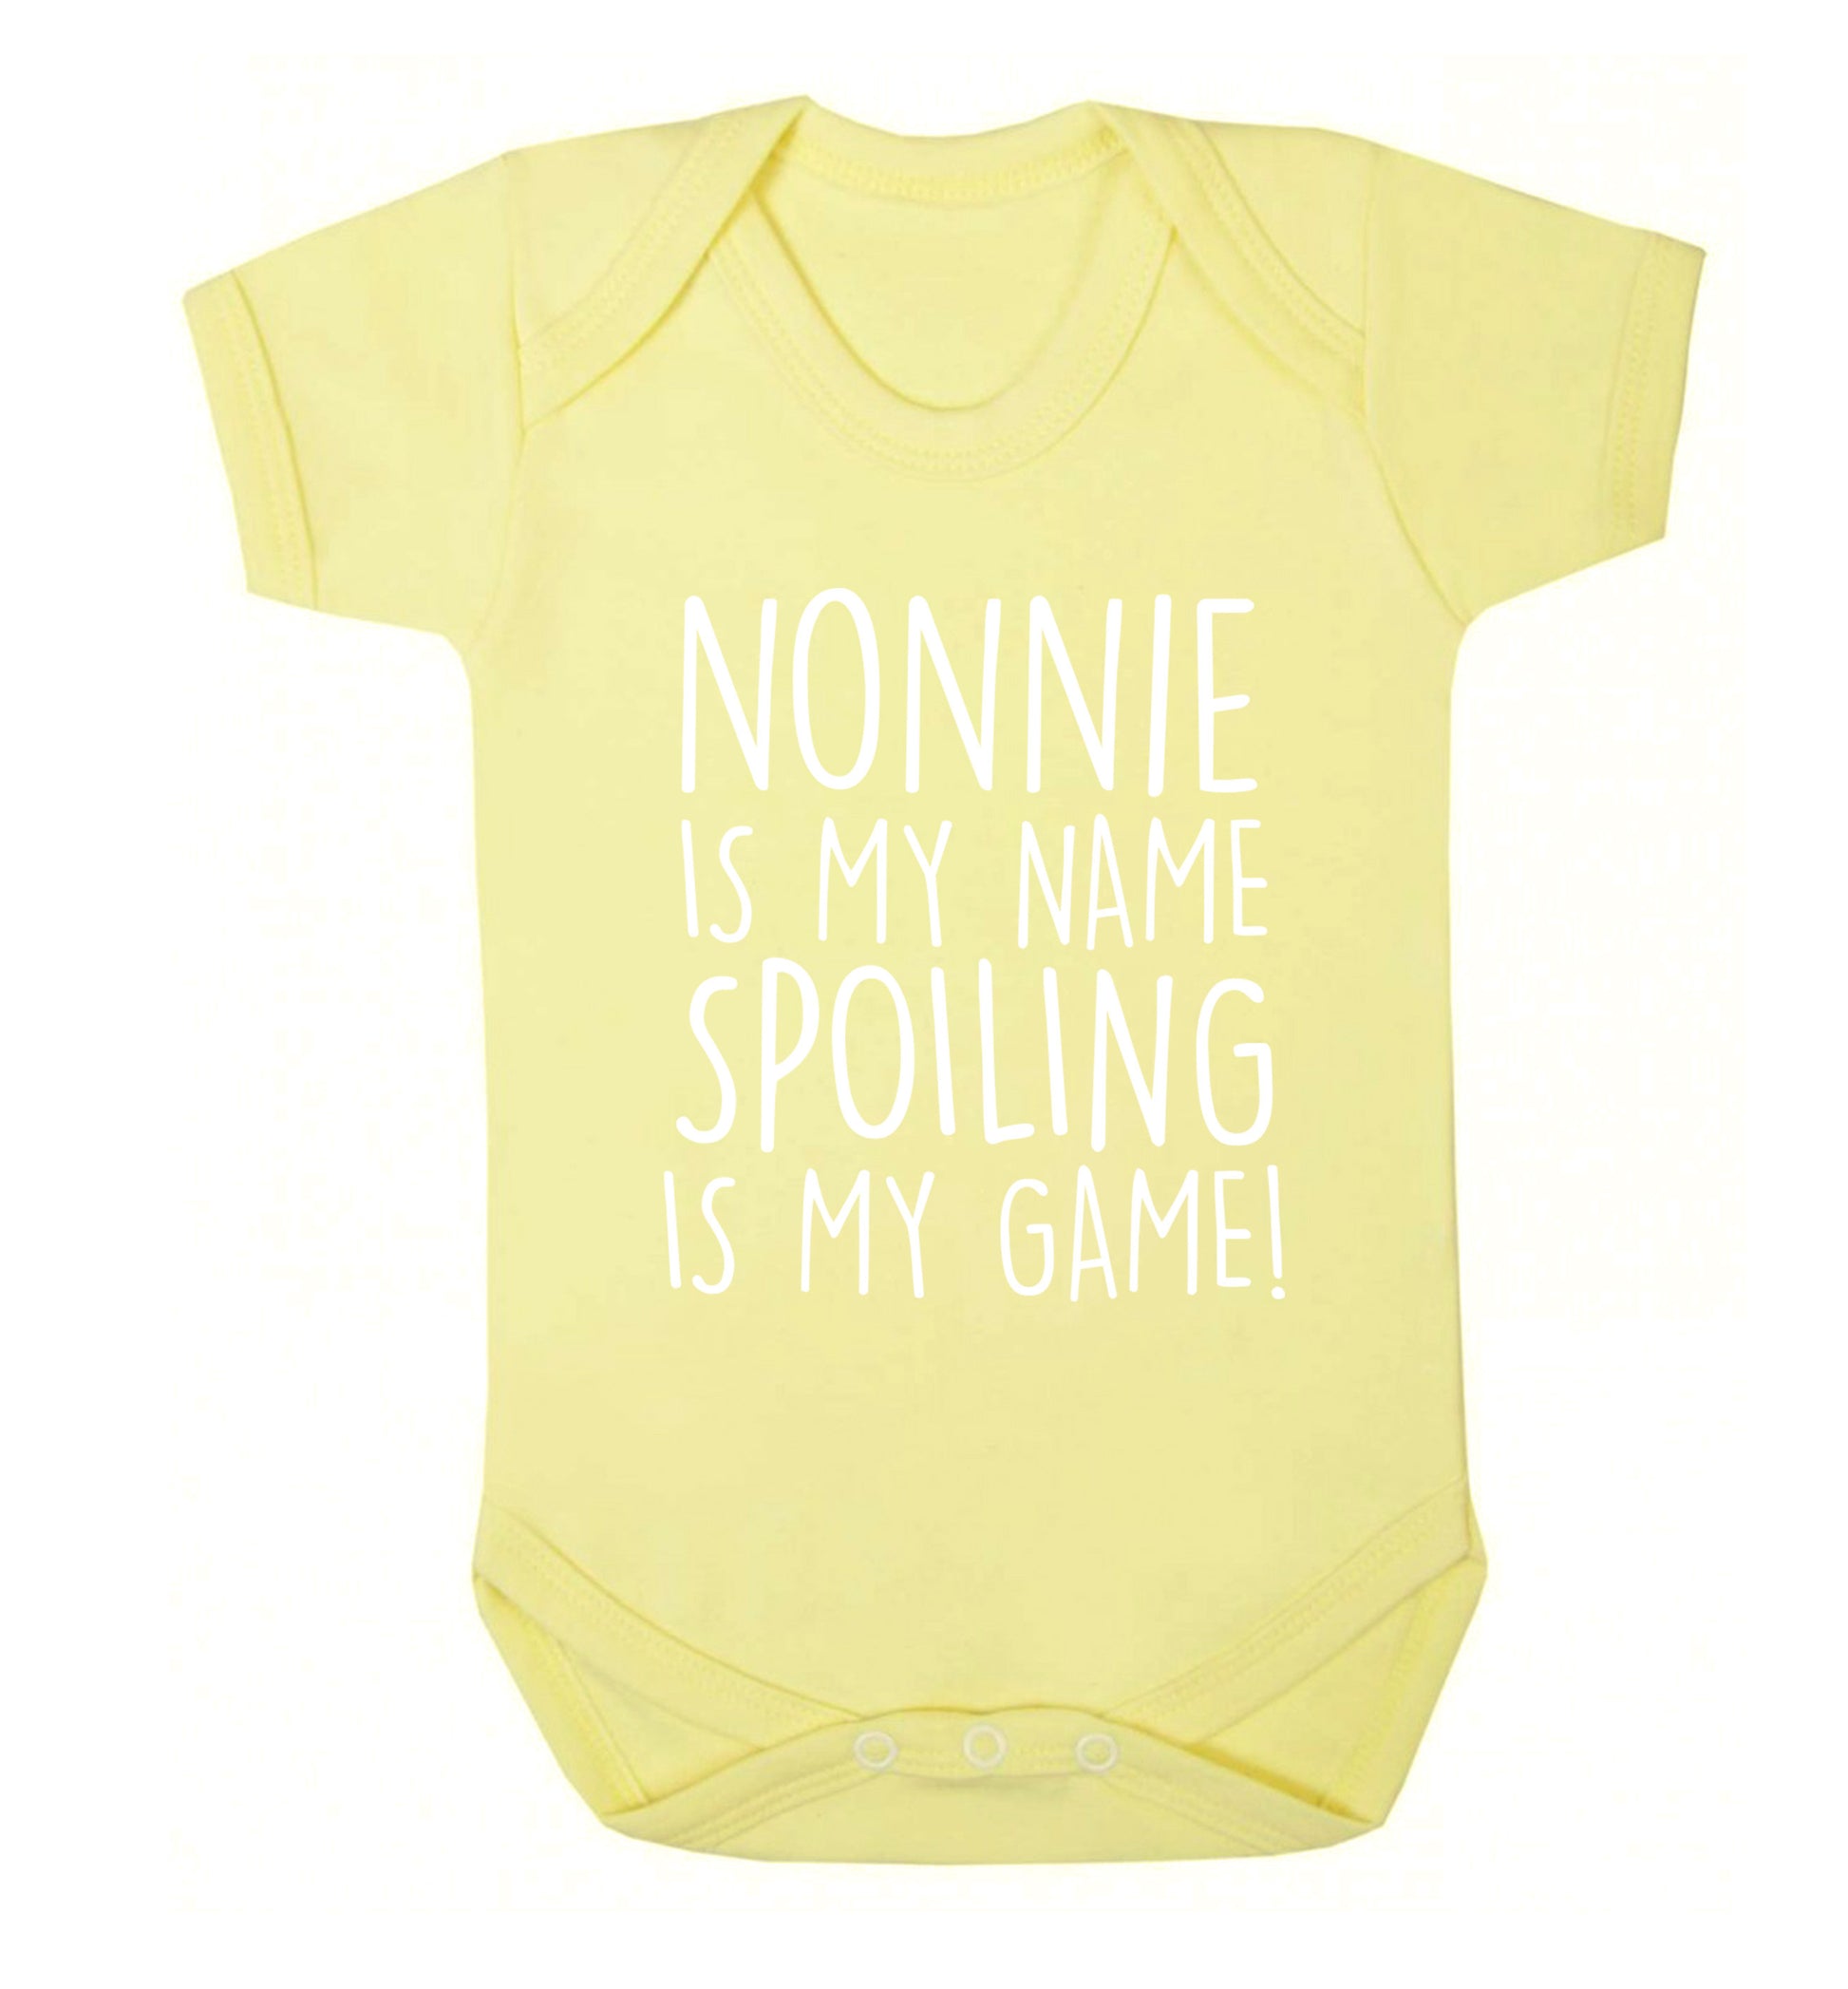 Nonnie is my name, spoiling is my game Baby Vest pale yellow 18-24 months